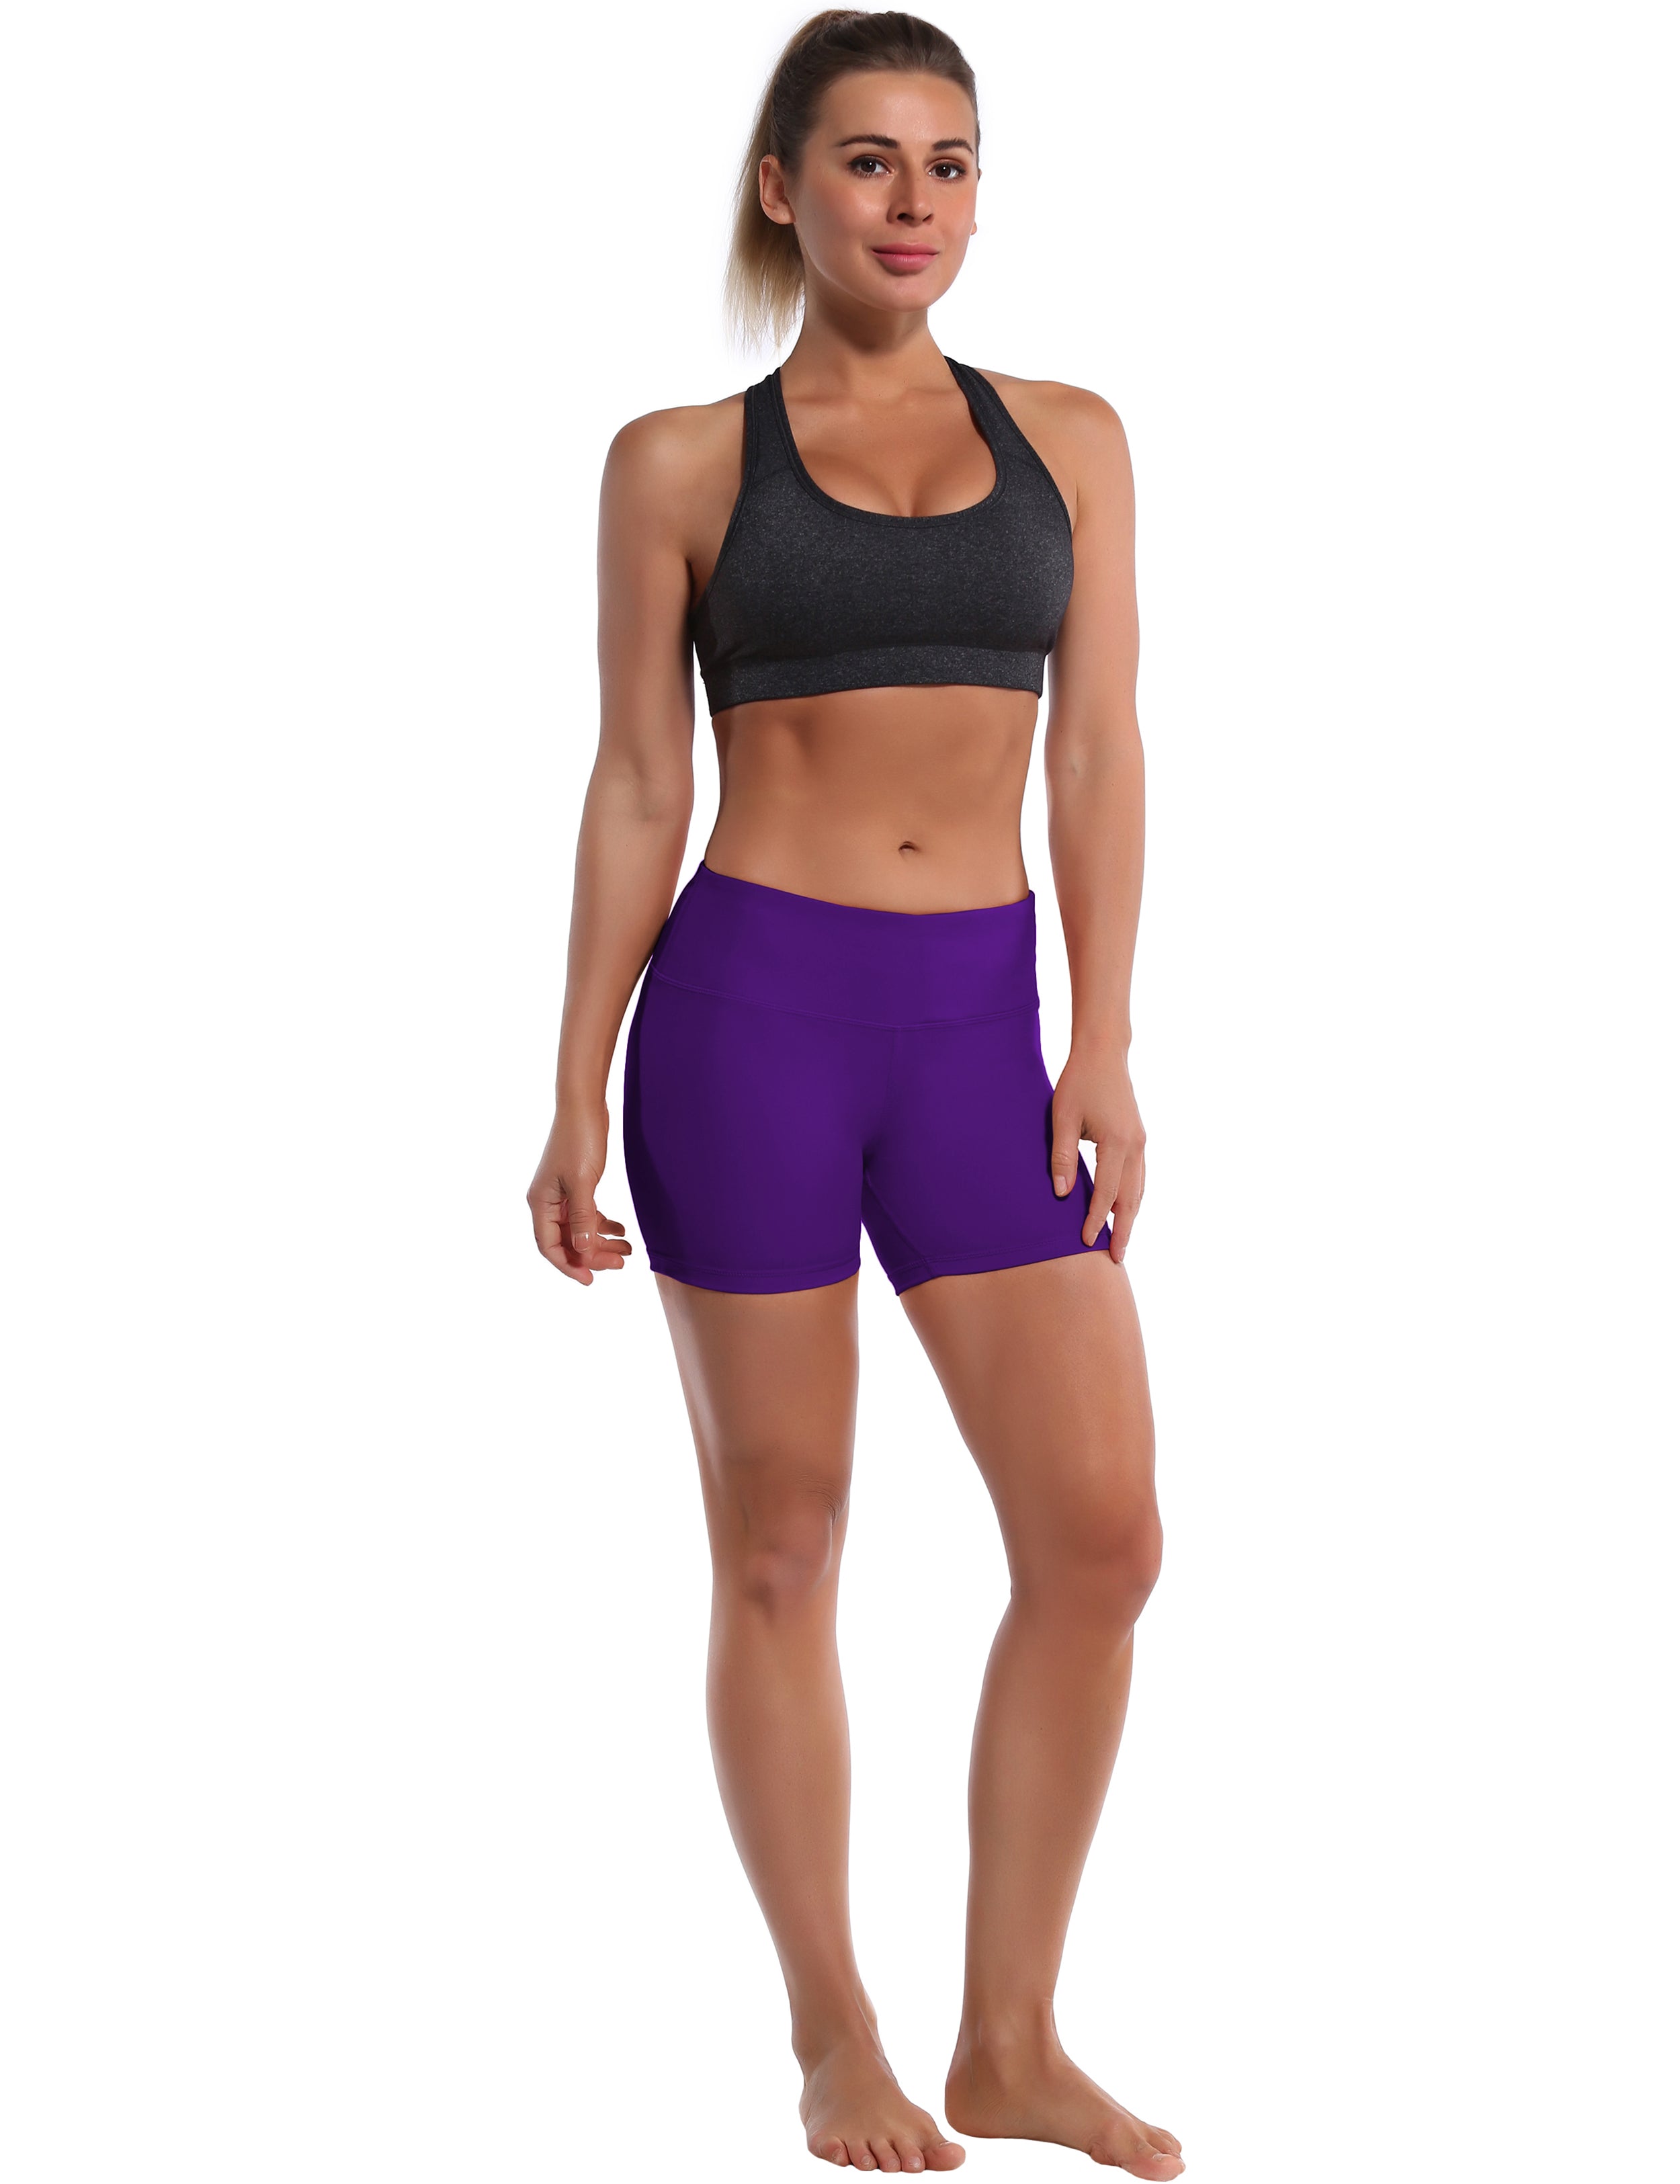 4" Yoga Shorts eggplantpurple Sleek, soft, smooth and totally comfortable: our newest style is here. Softest-ever fabric High elasticity High density 4-way stretch Fabric doesn't attract lint easily No see-through Moisture-wicking Machine wash 75% Nylon, 25% Spandex